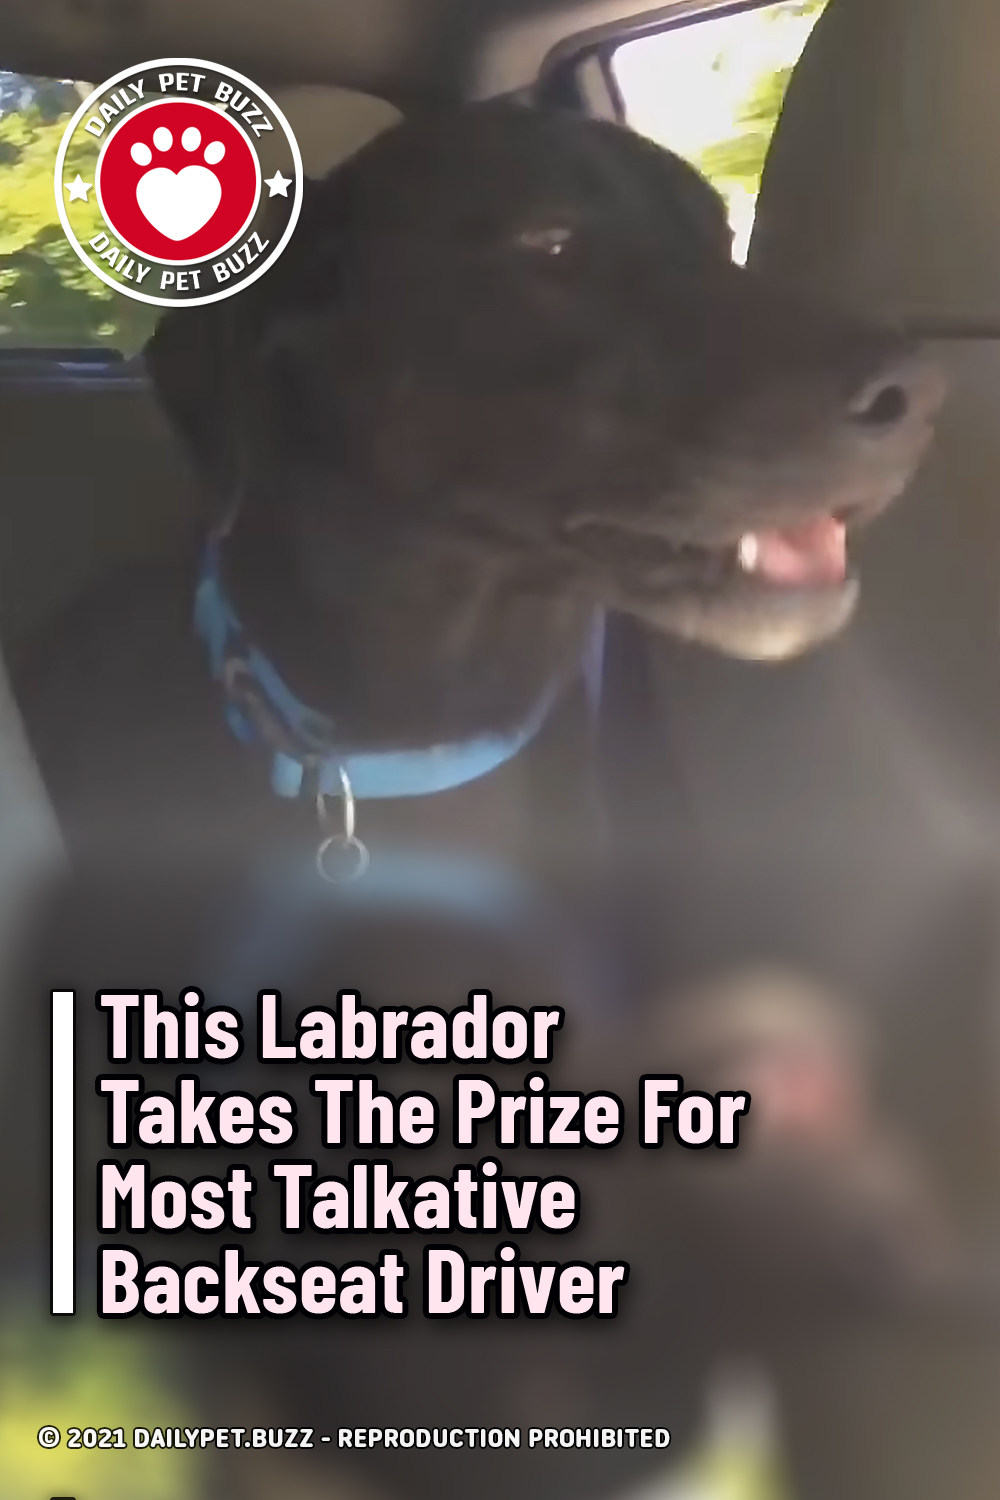 This Labrador Takes The Prize For Most Talkative Backseat Driver